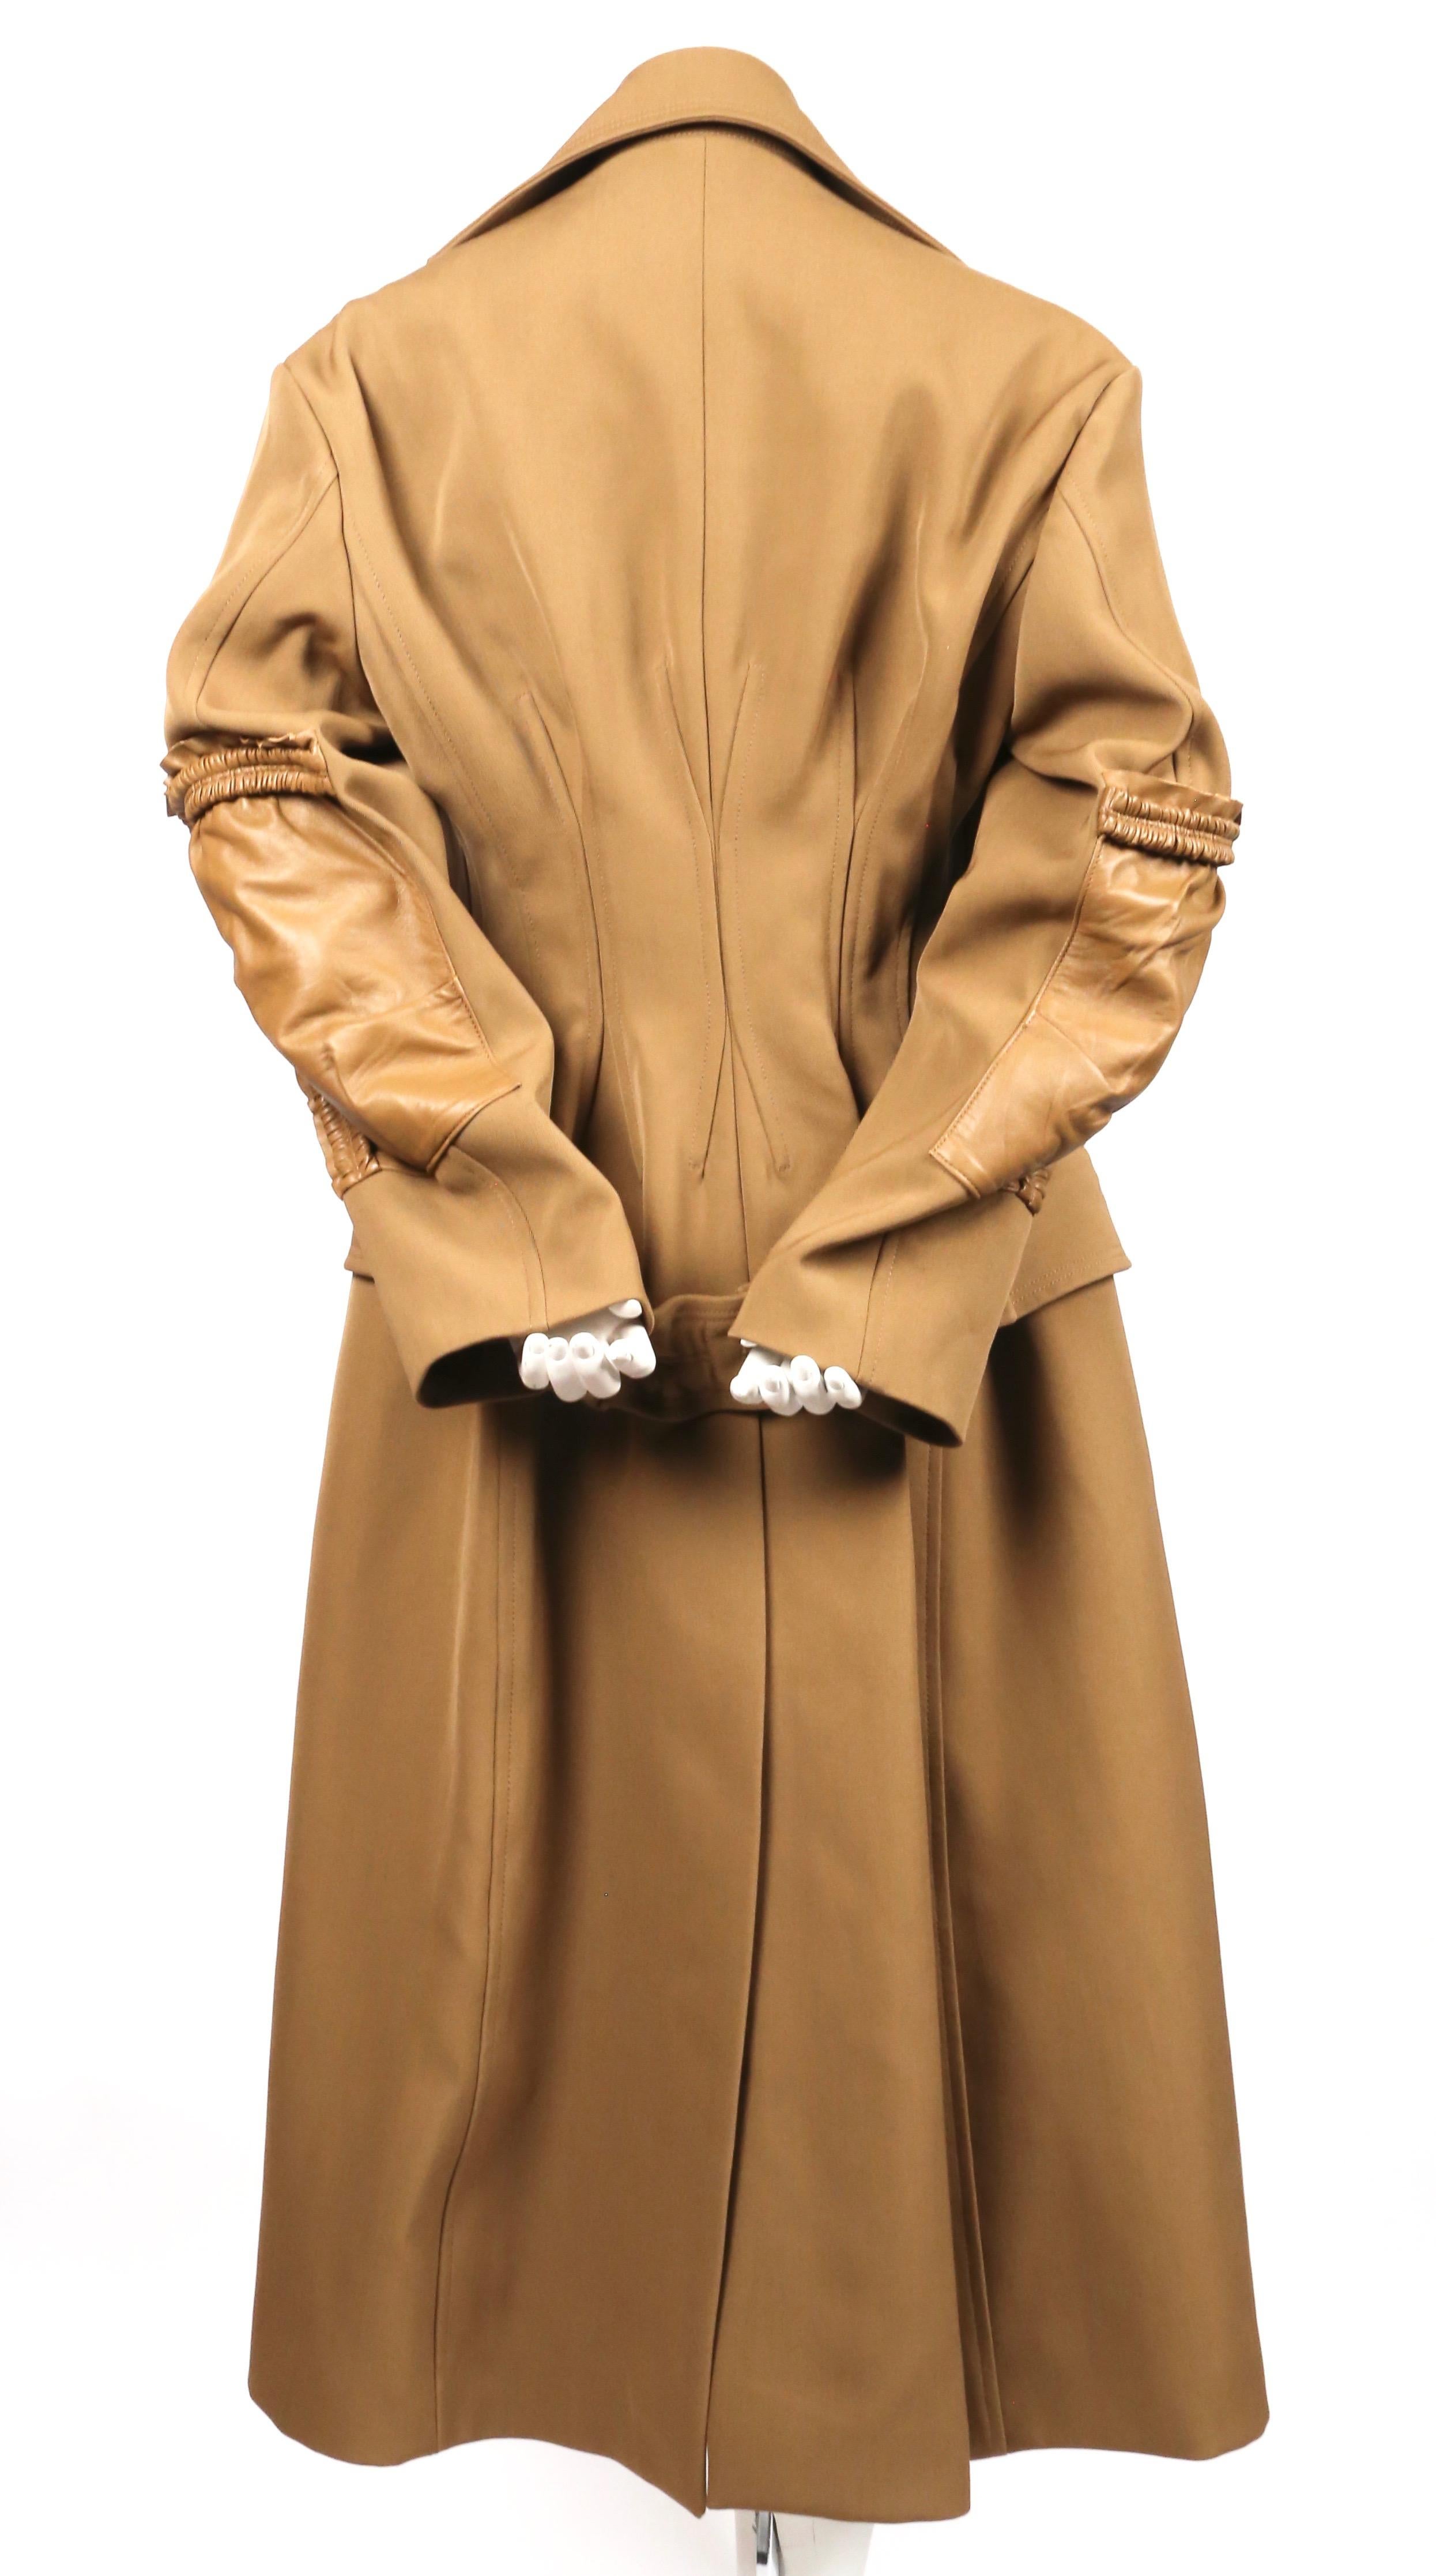 Women's CELINE by PHOEBE PHILO tan runway coat with leather patches & half belt - NEW